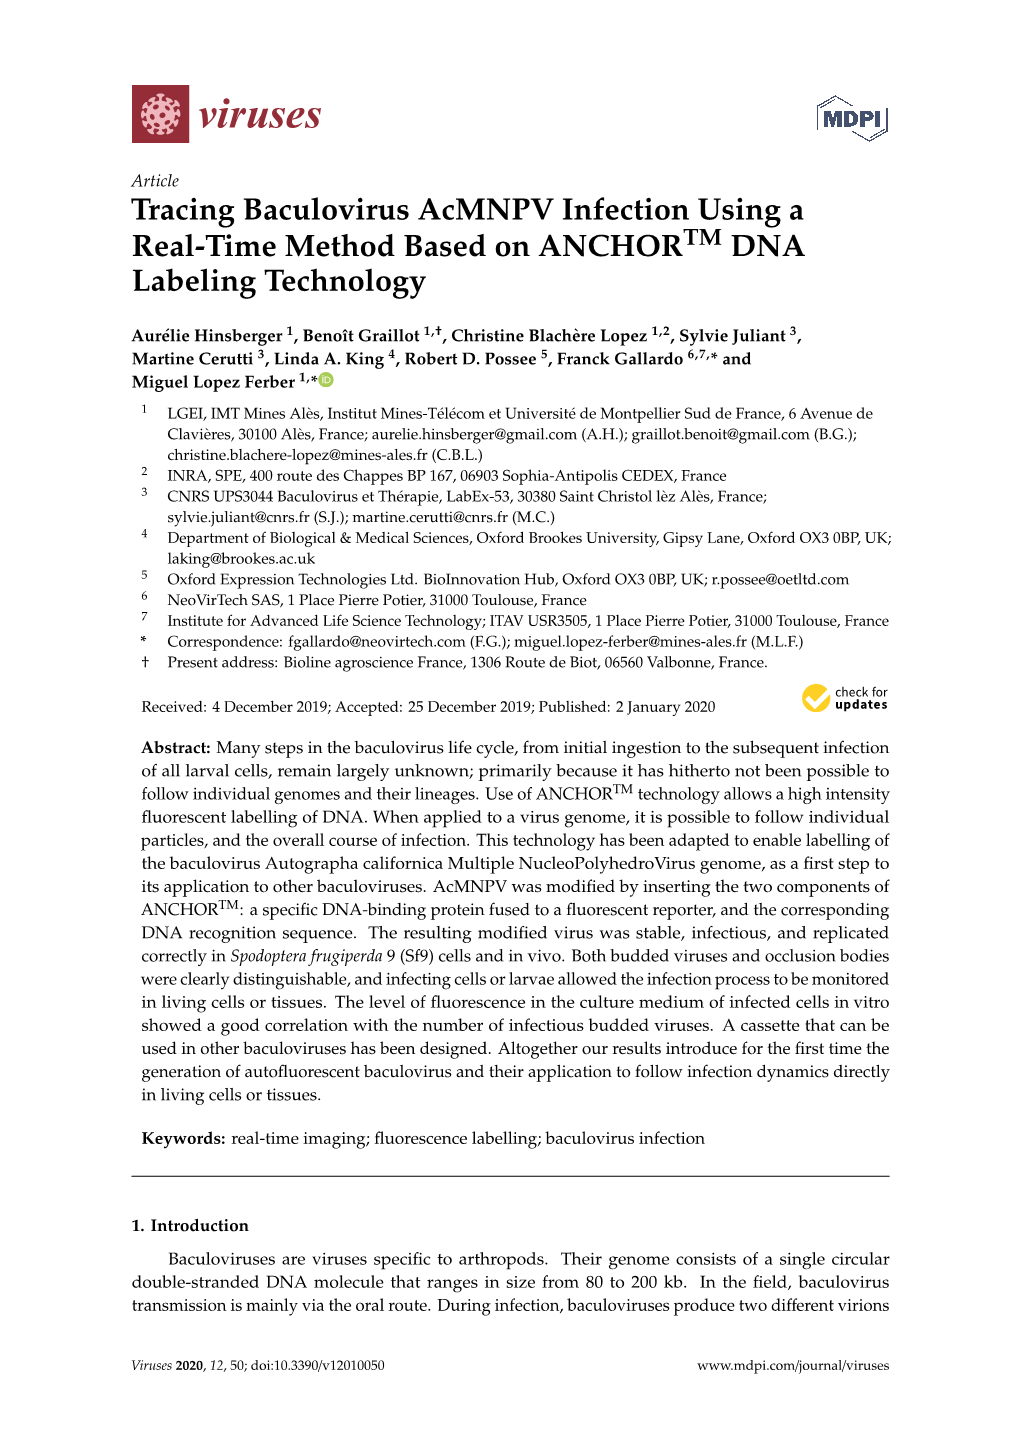 Tracing Baculovirus Acmnpv Infection Using a Real-Time Method Based on ANCHORTM DNA Labeling Technology